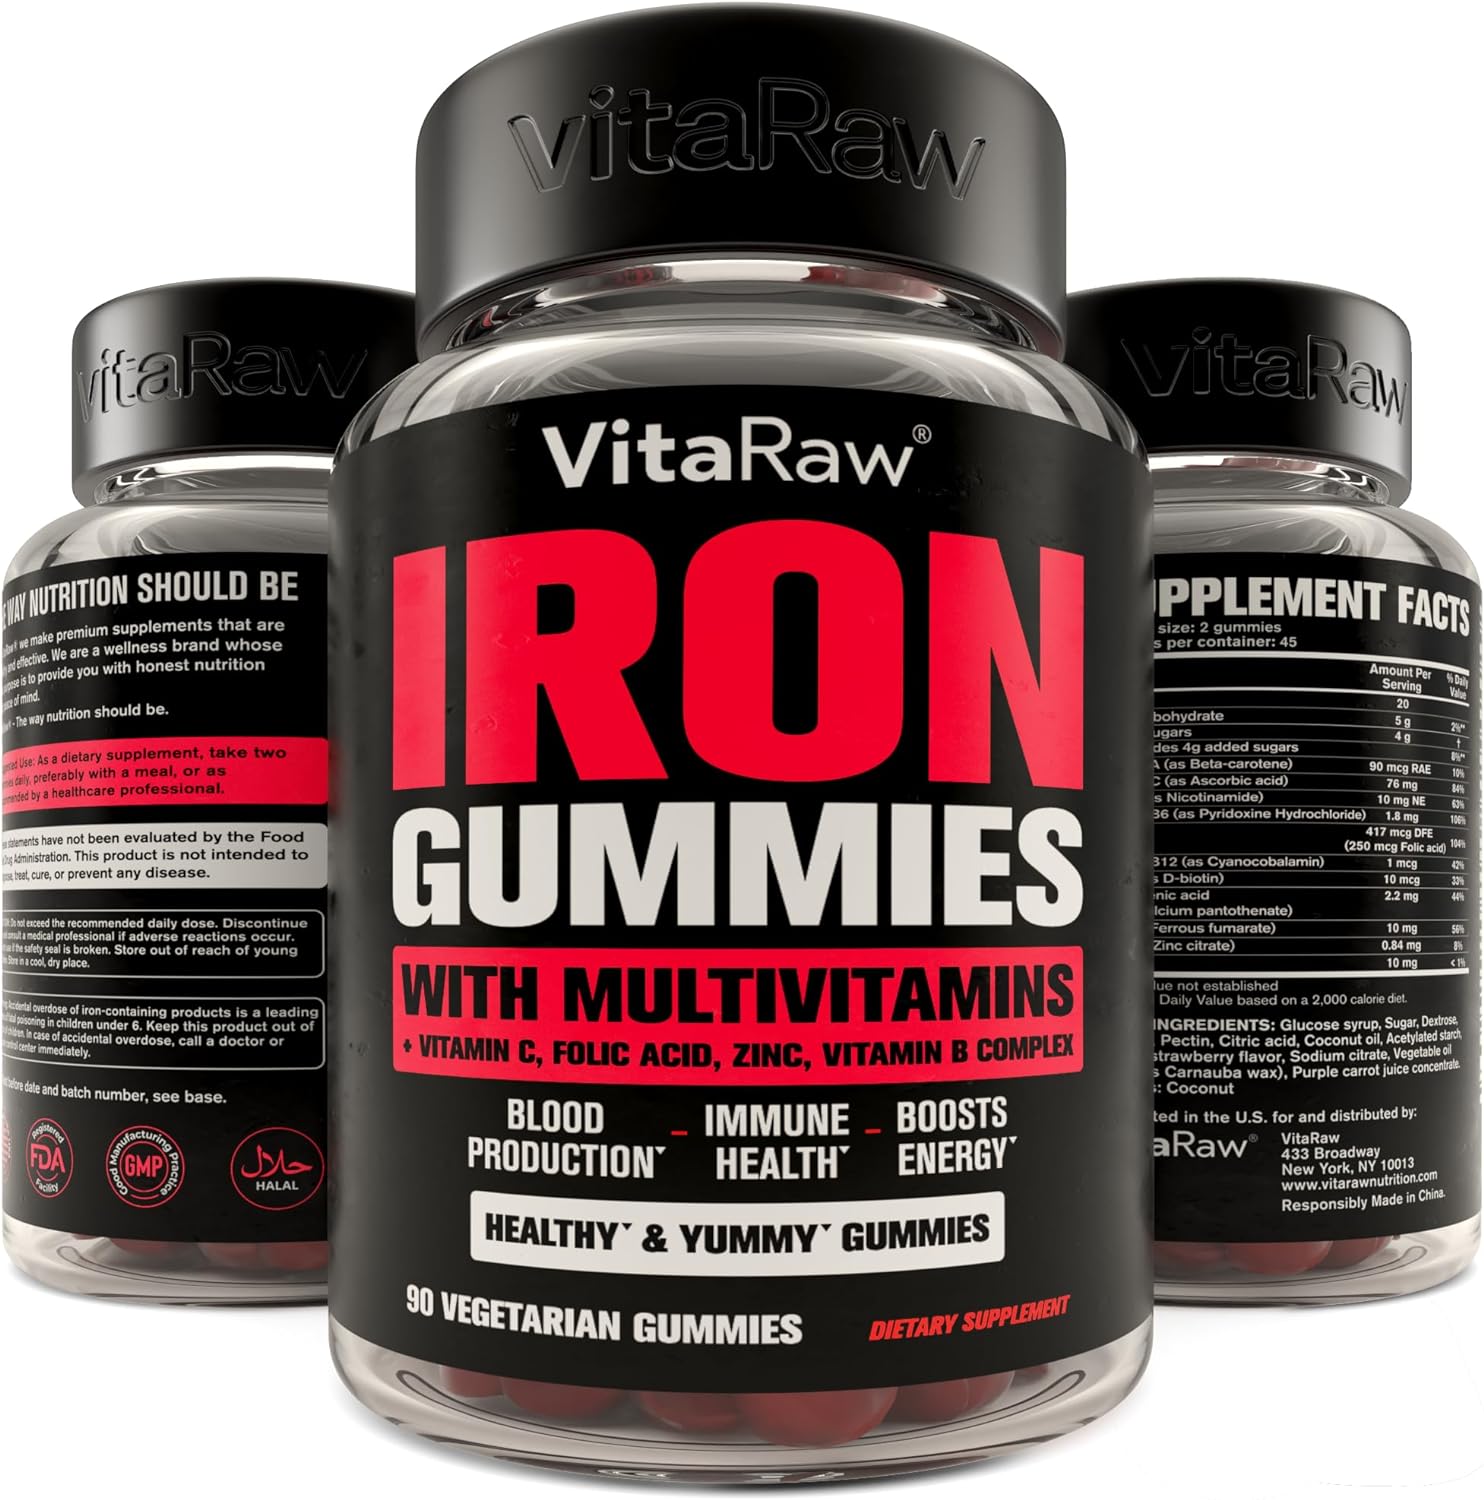 Tasty Iron Gummies (1.5 Month Supply) for Women, Men, Teens, and Kids - Iron Supplements for Women - Iron Gummies for Kids - Supports Blood Oxygen - Vegan Iron and Vitamin C, A, and Zinc - Gluten Free